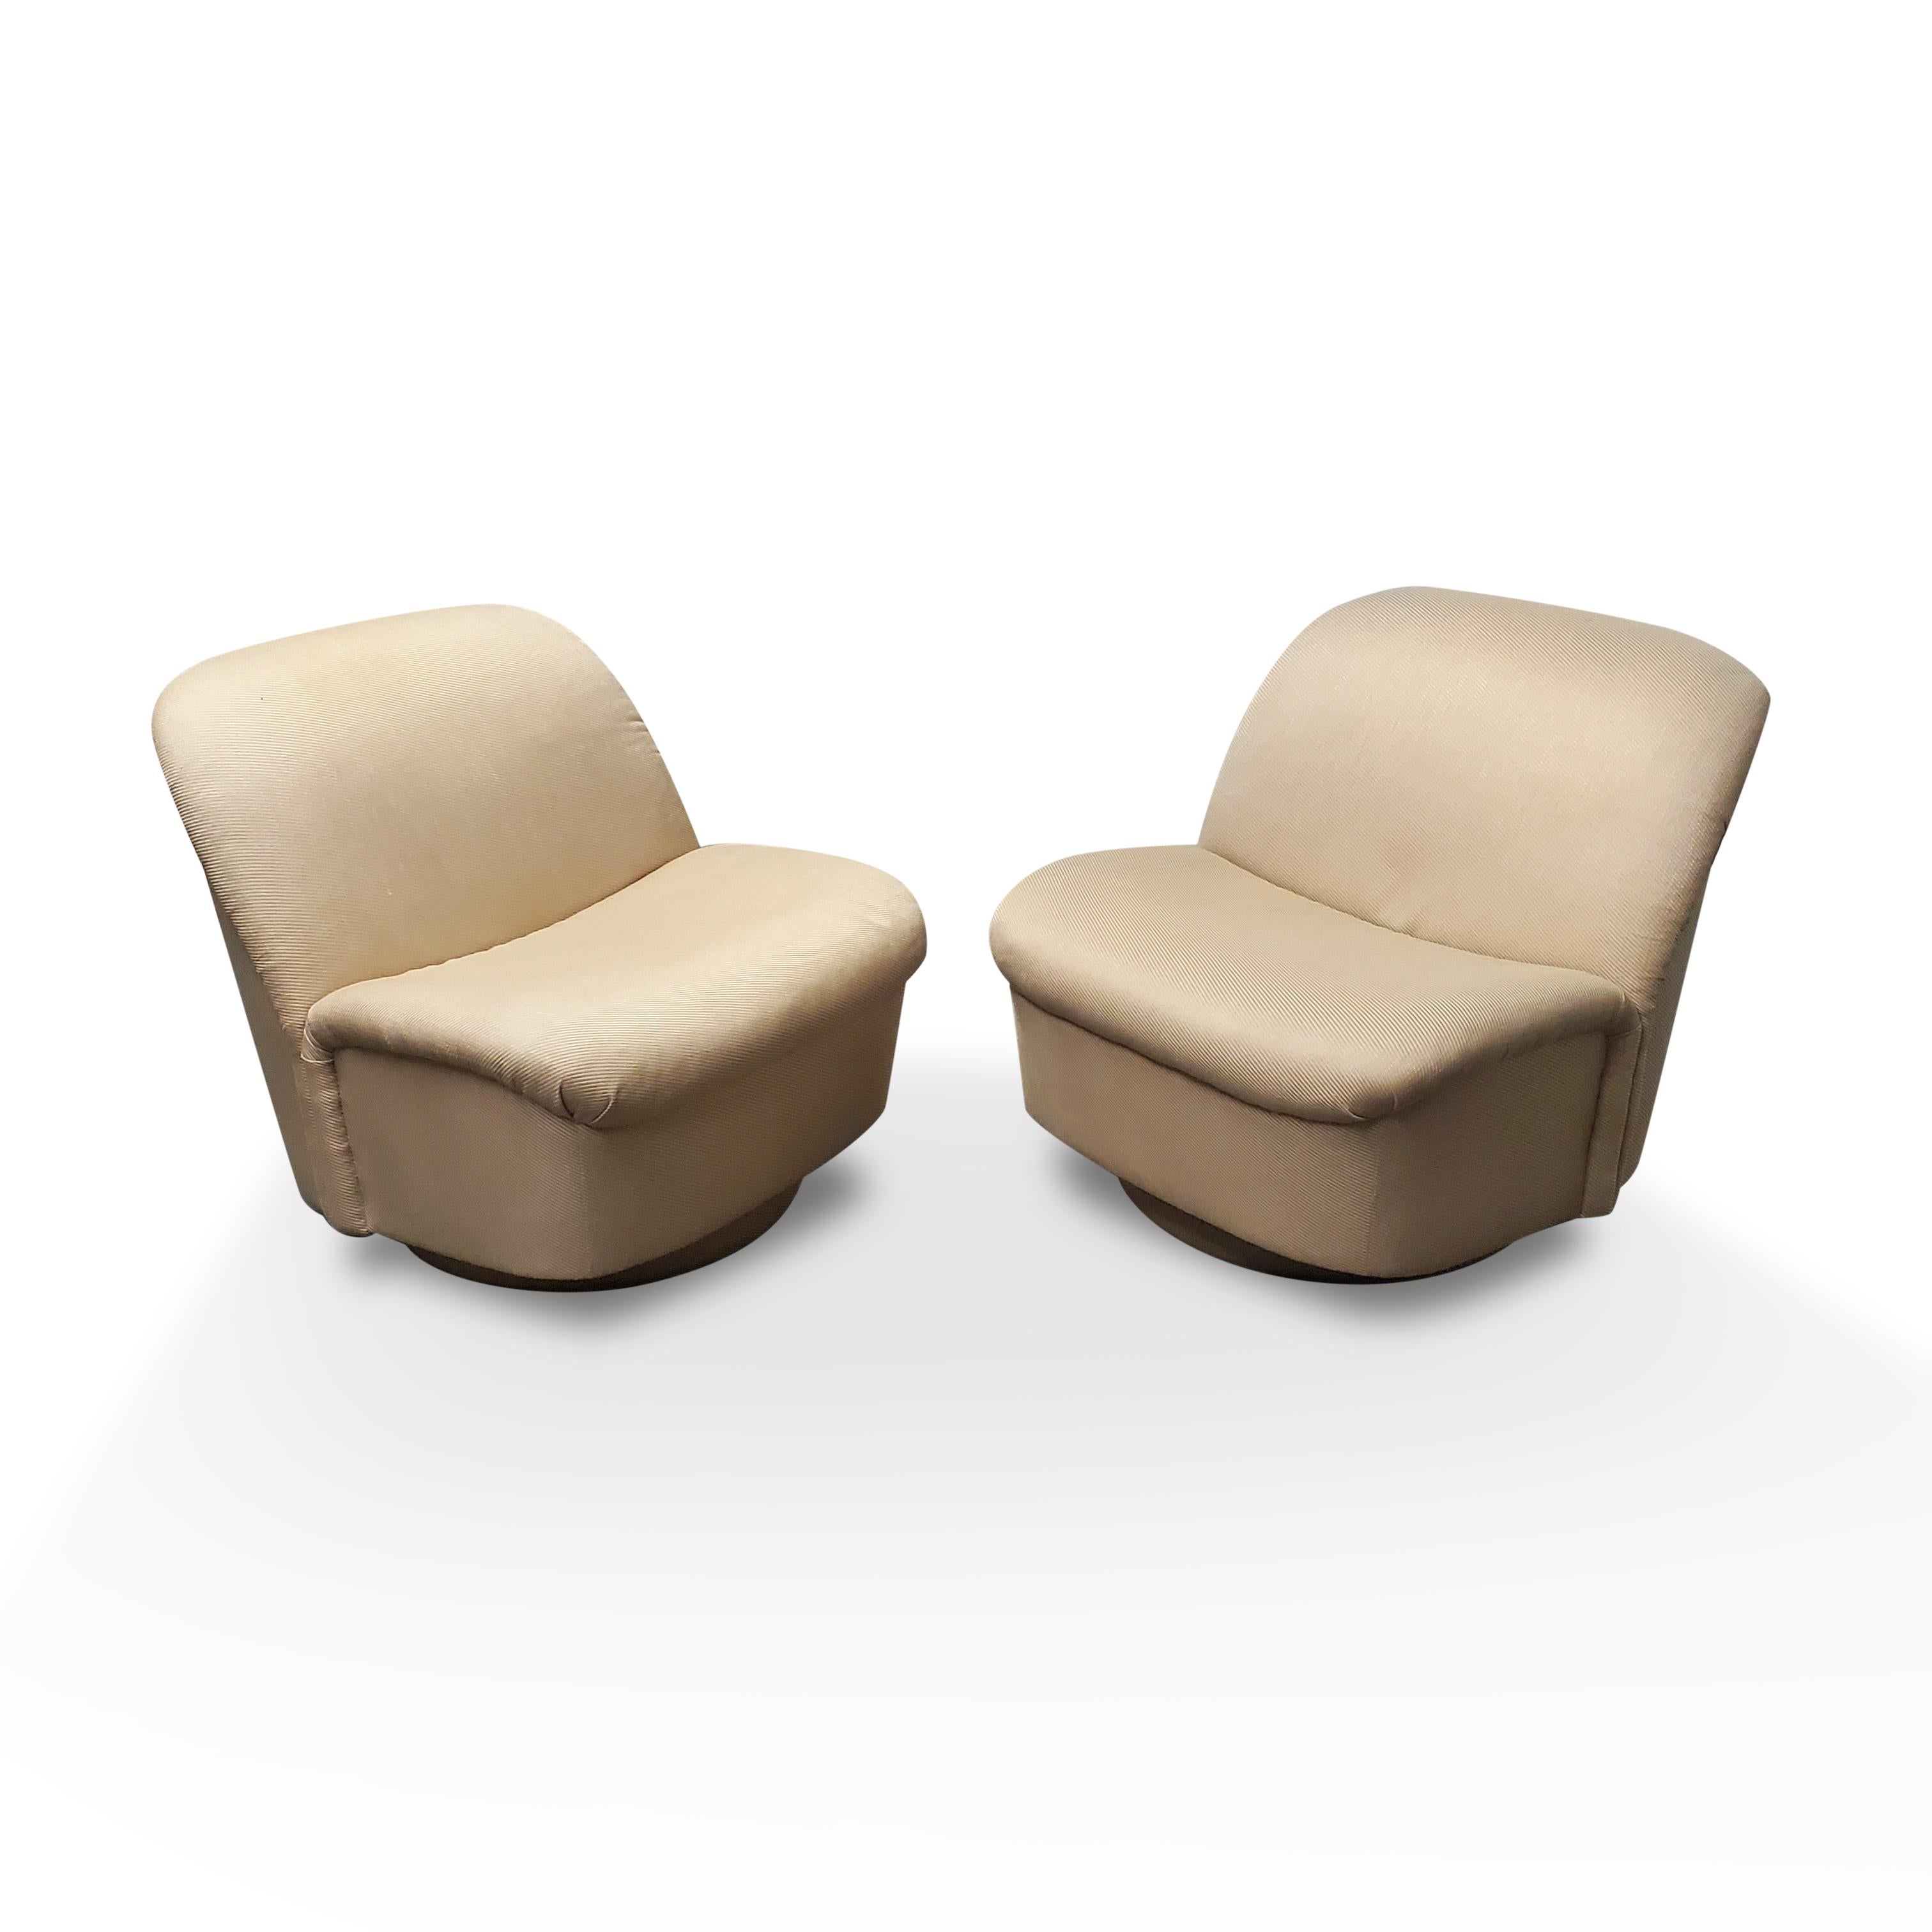 20th Century Pair of Signed Directional Swivel / Tilt Lounge Chairs